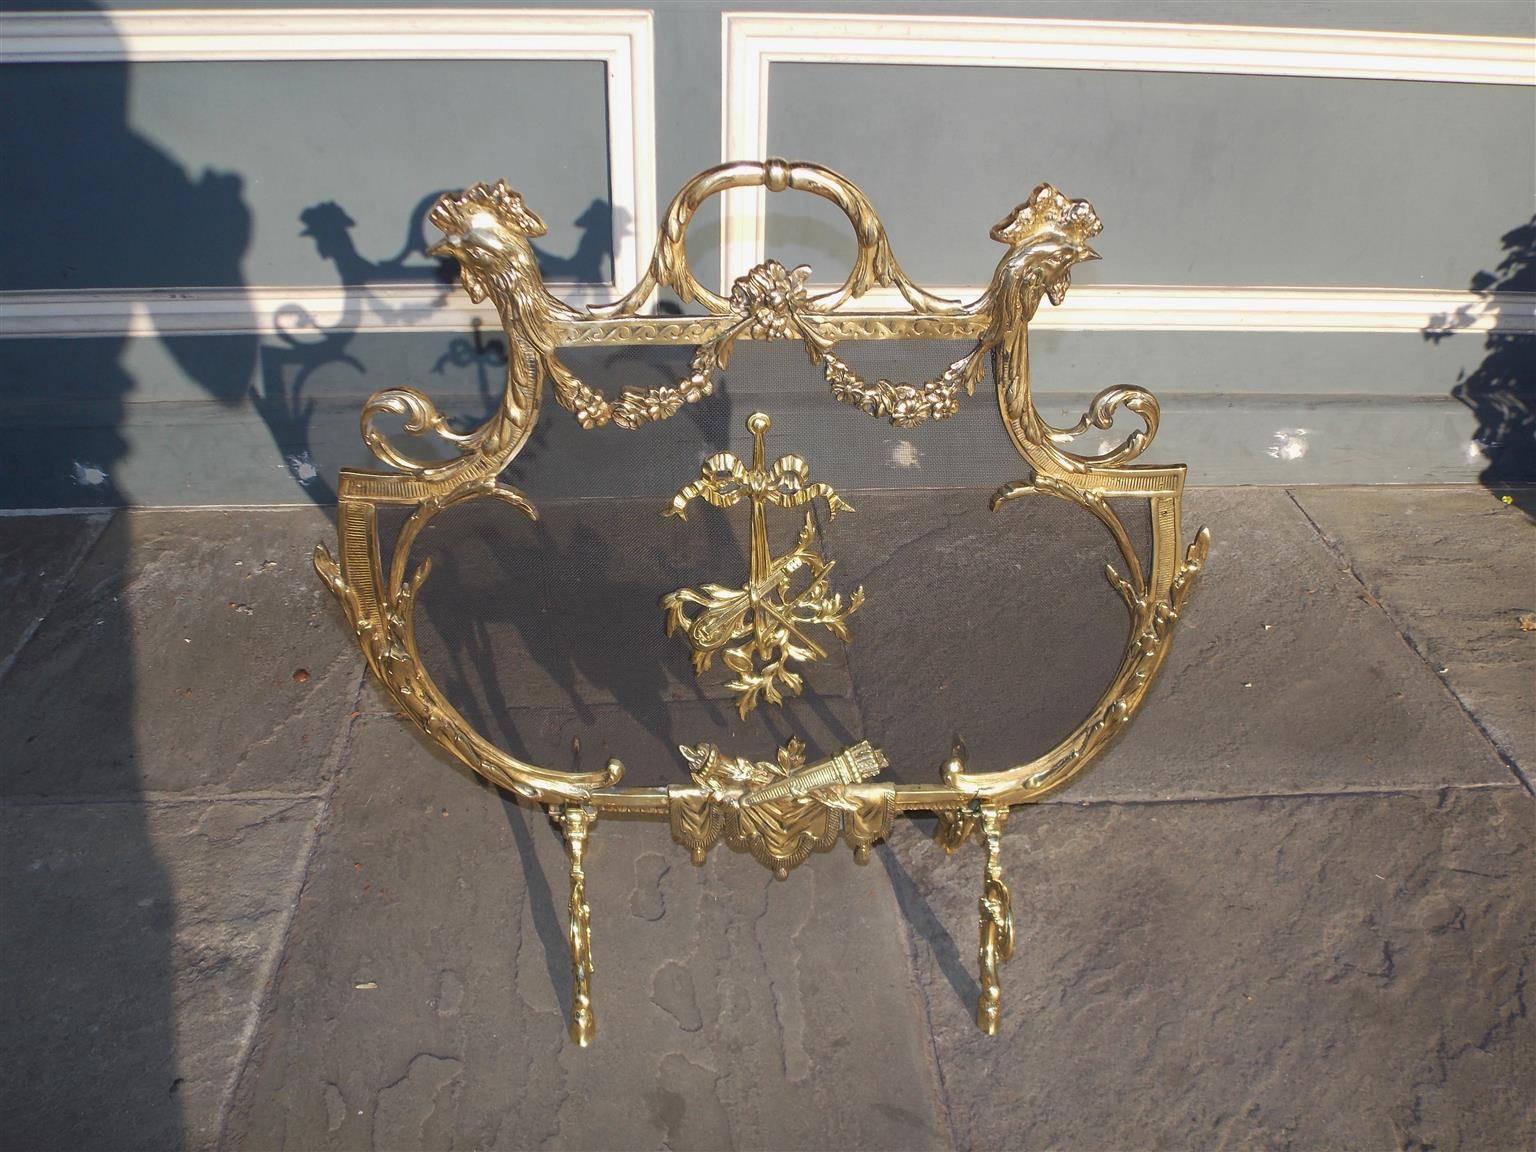 French brass fire screen with flanking rooster heads, centered foliage handle, floral swags, decorative ribbon surrounded by music instruments, lower torches resting on tassels, terminating on four acanthus scrolled legs with hoof feet, Early 19th